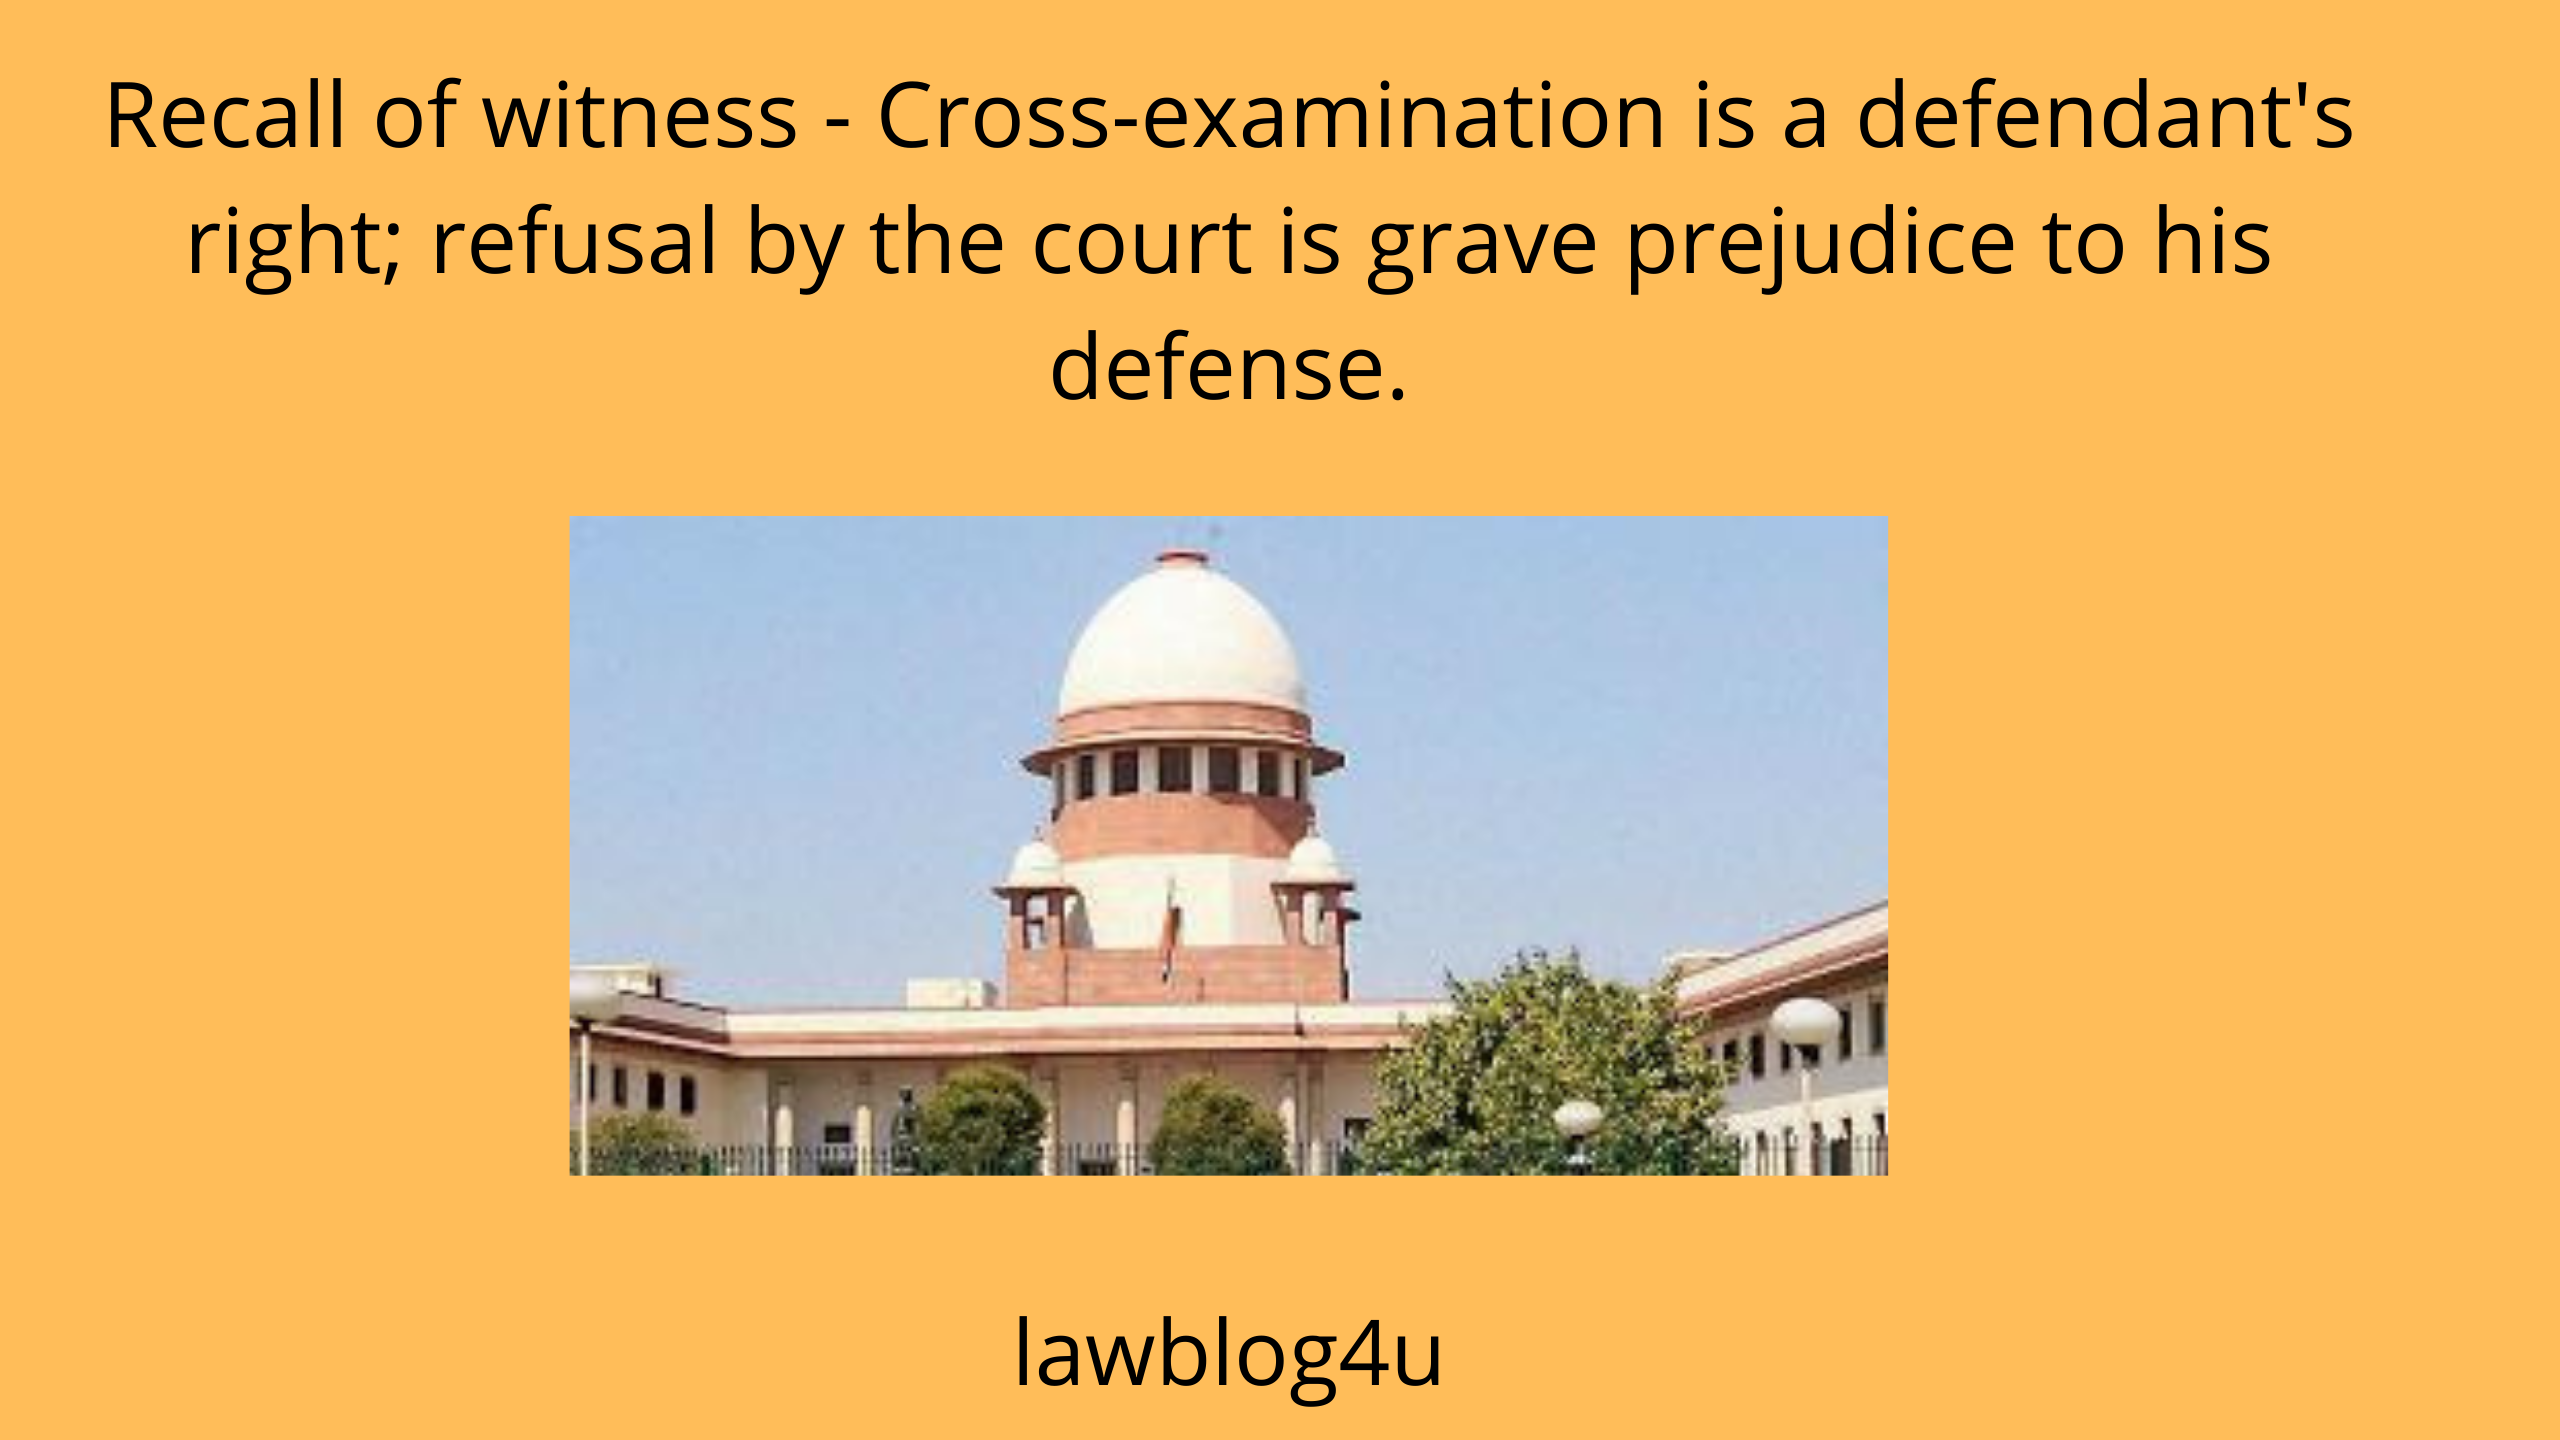 Recall of witness - Cross-examination is a defendant's right; refusal by the court is grave prejudice to his defense.